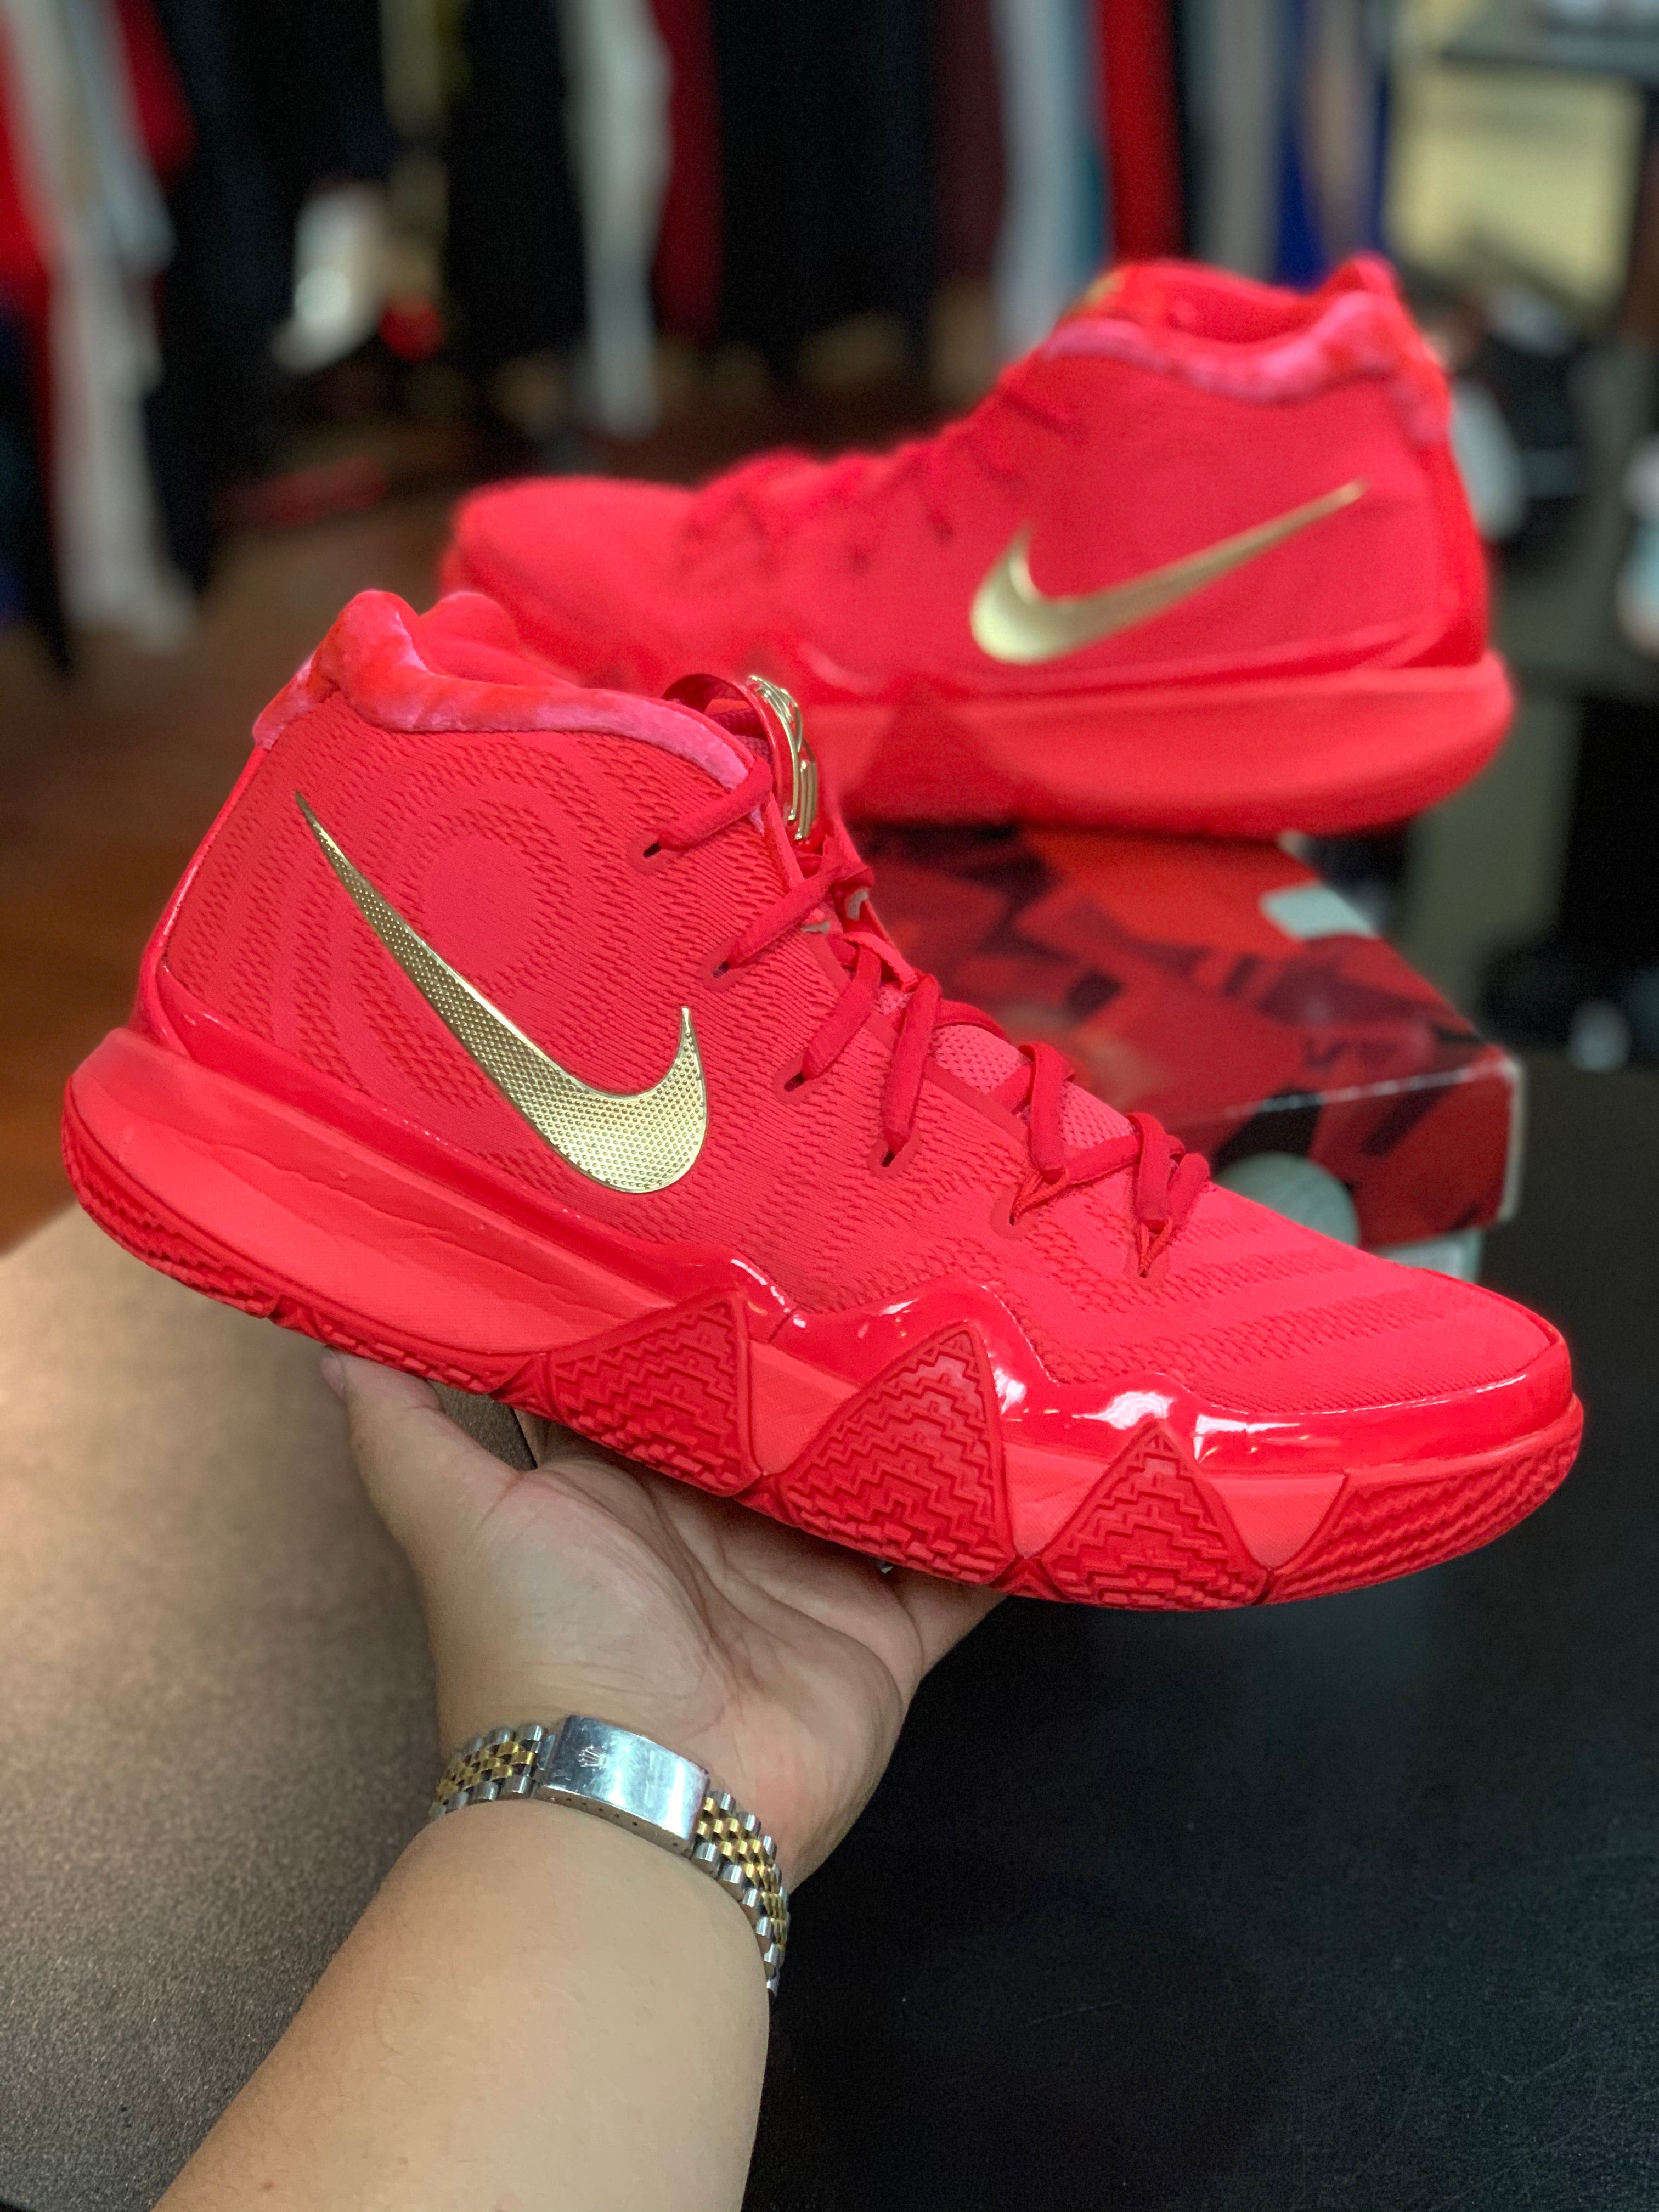 Kyrie 4 “Red Carpet” Request